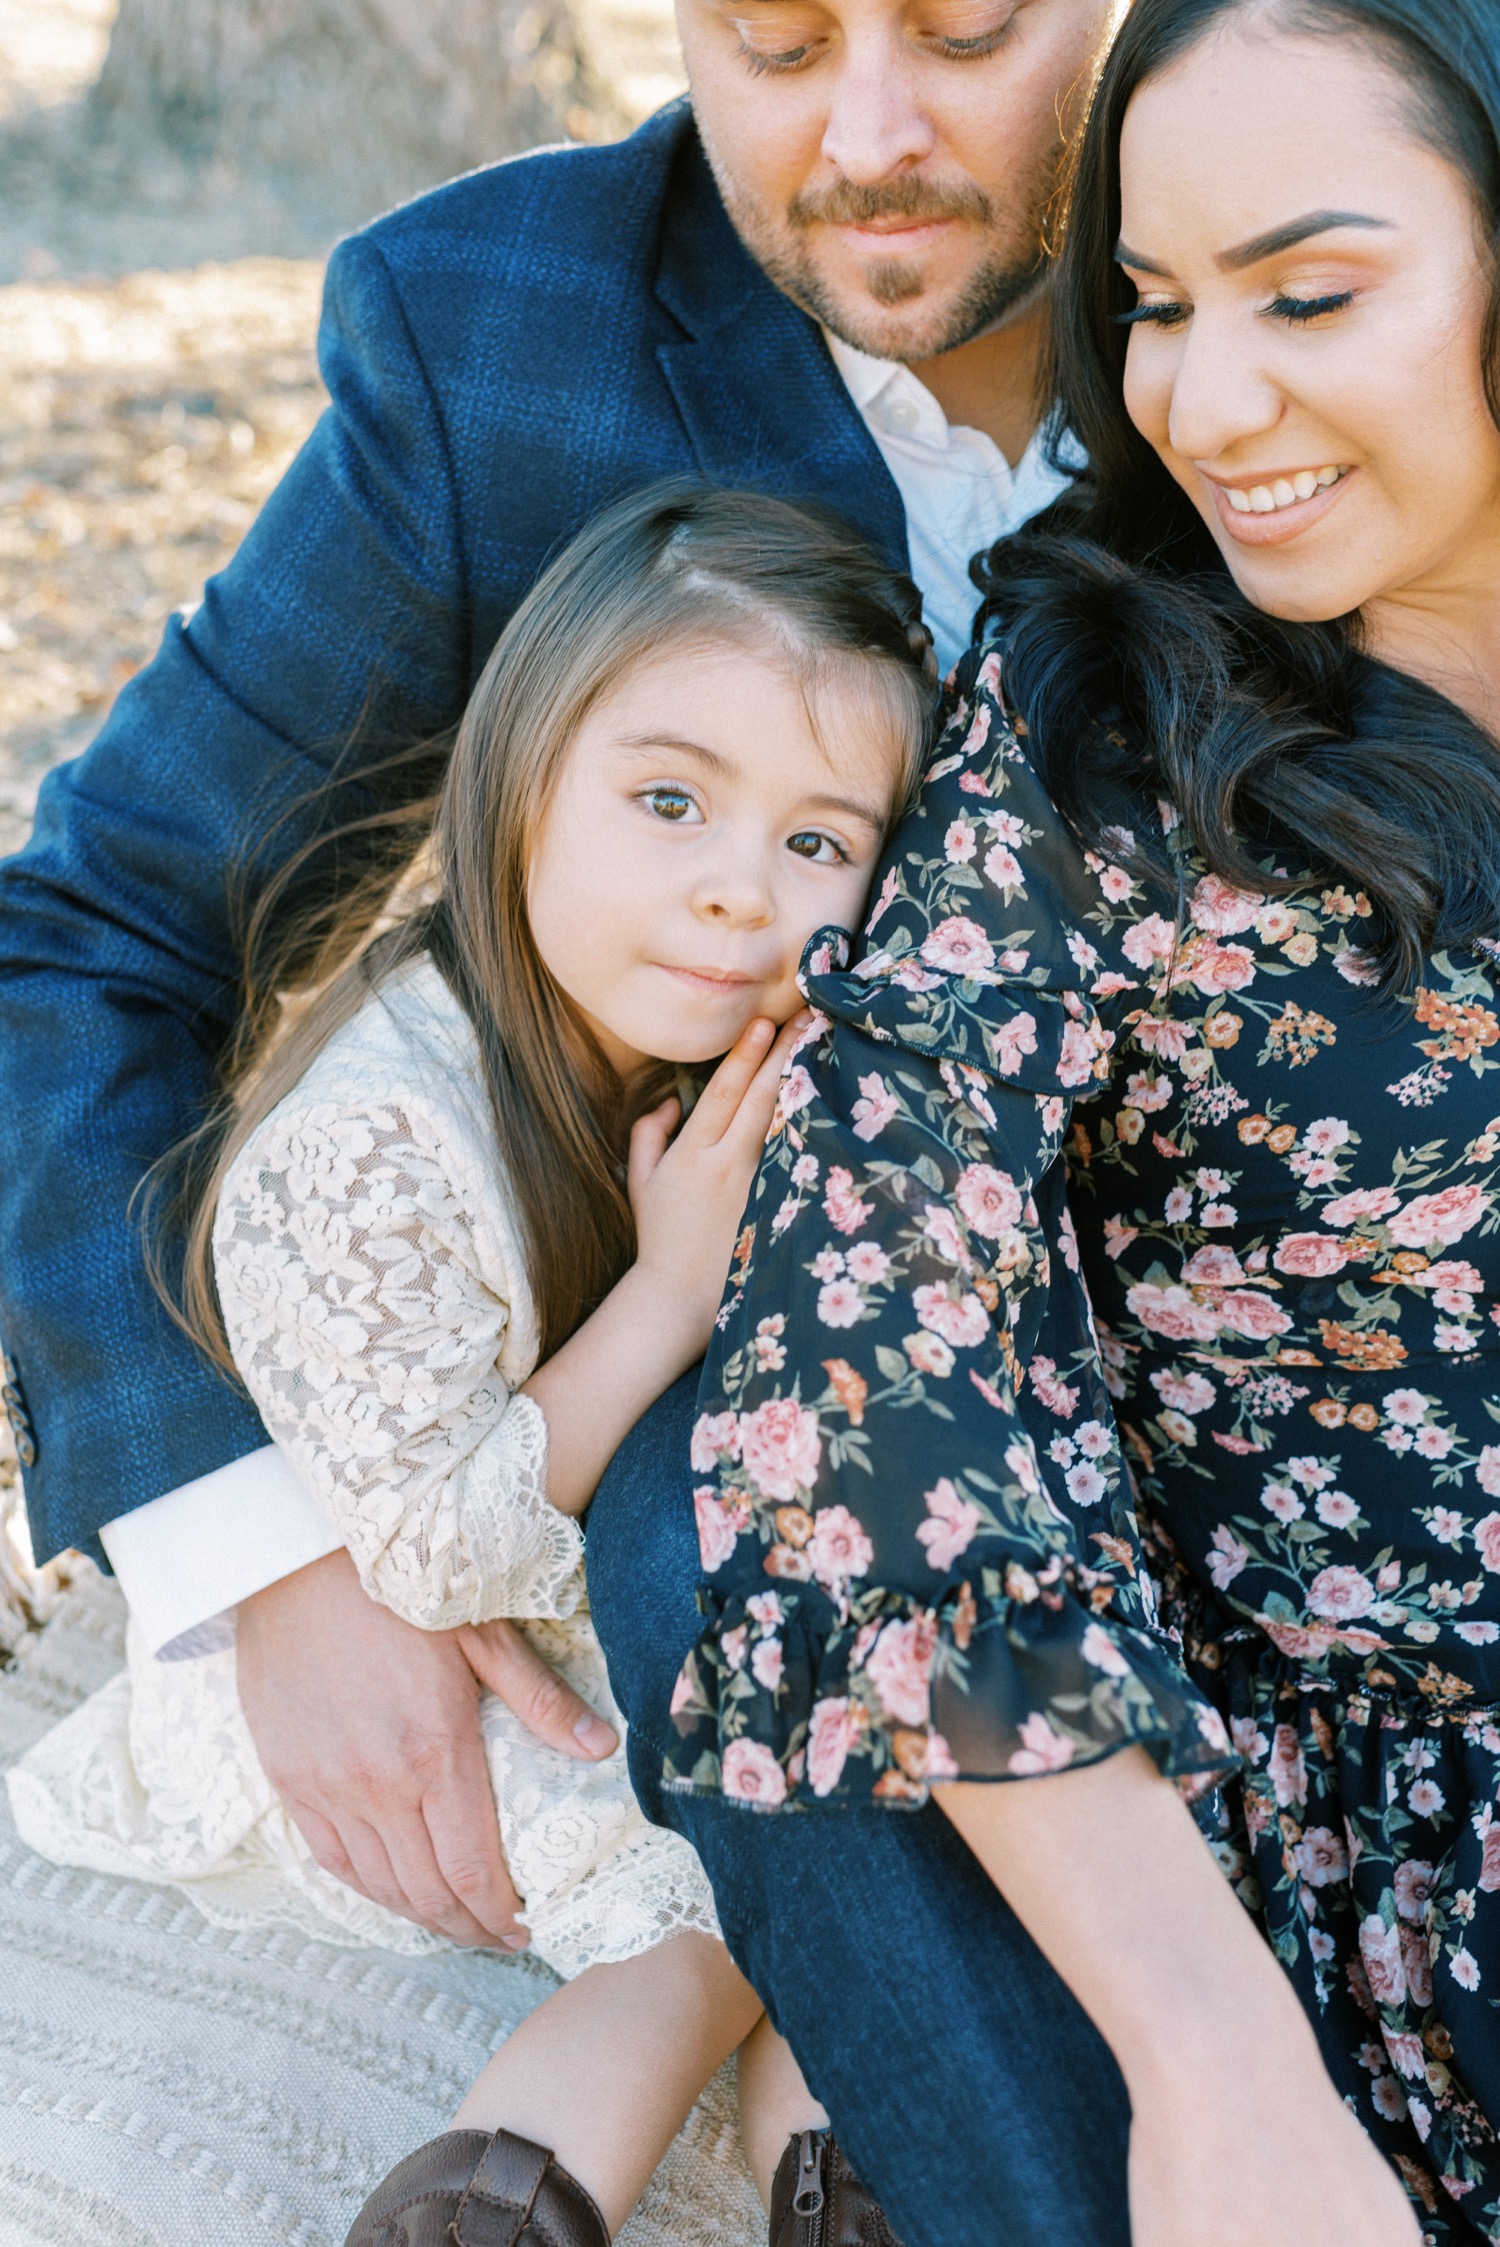 5 Poses and Prompts for “Candid” Family Portraits | Rangefinder